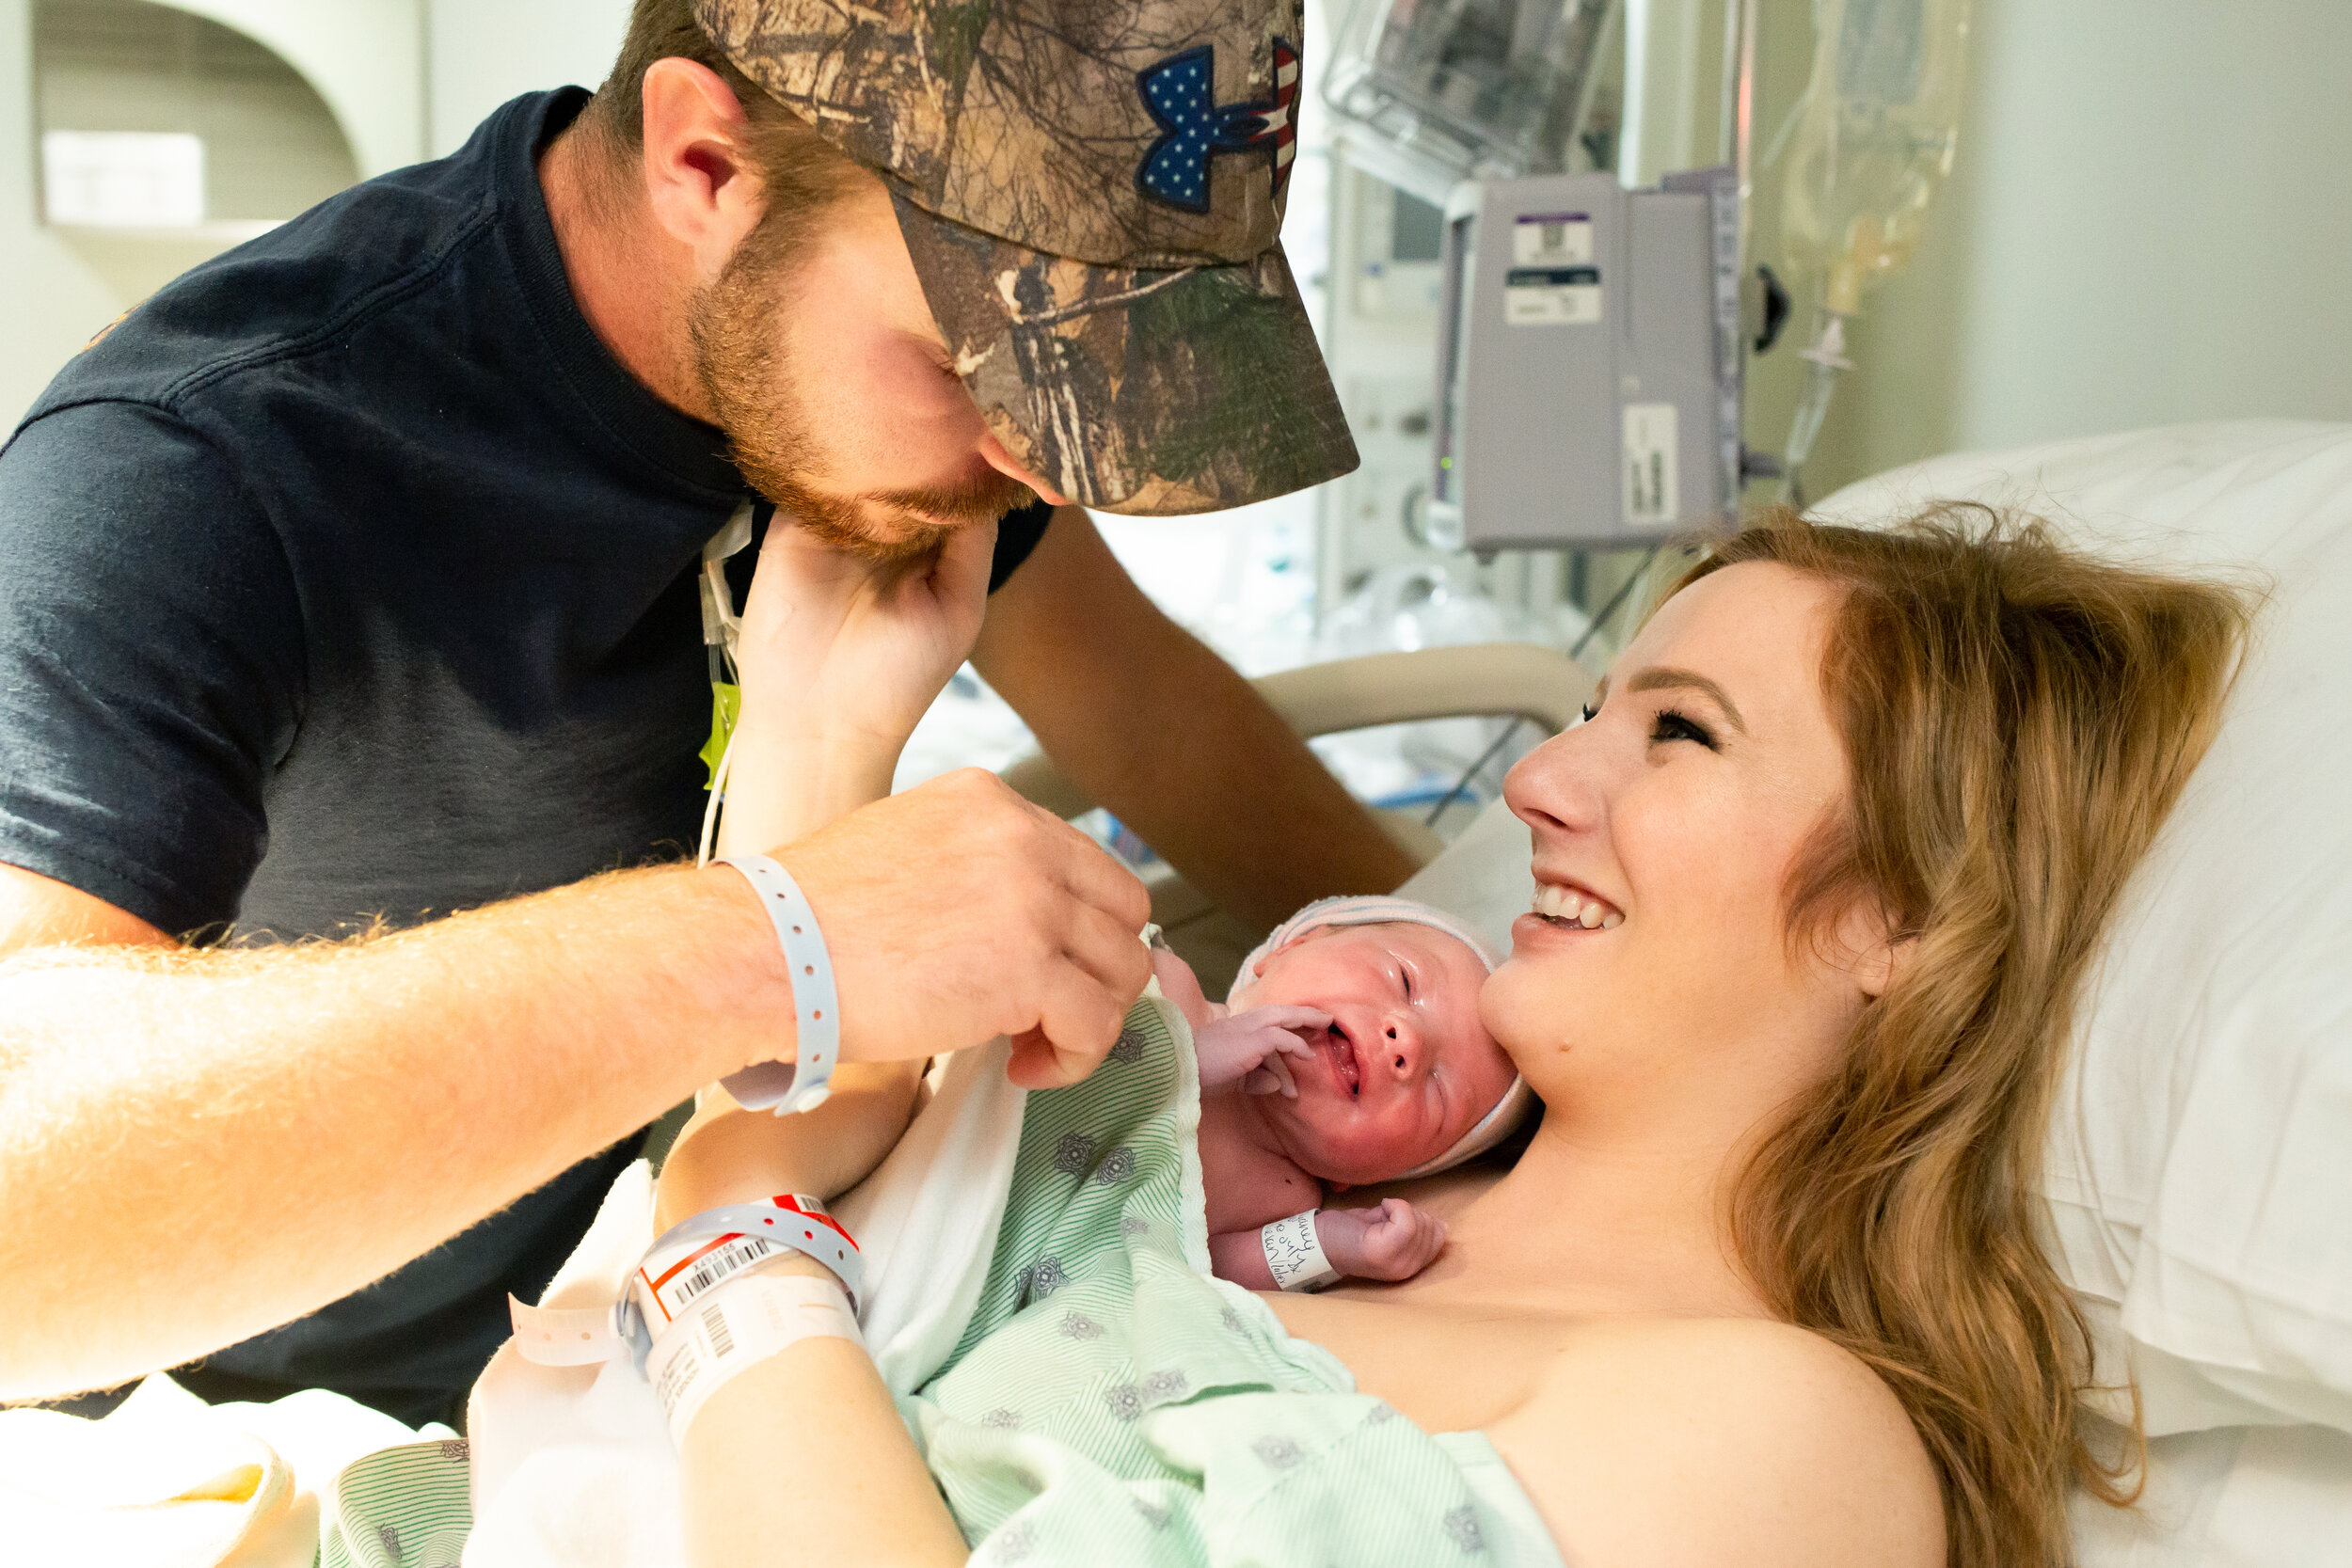 wife smiling at husband while he looks at their newborn baby